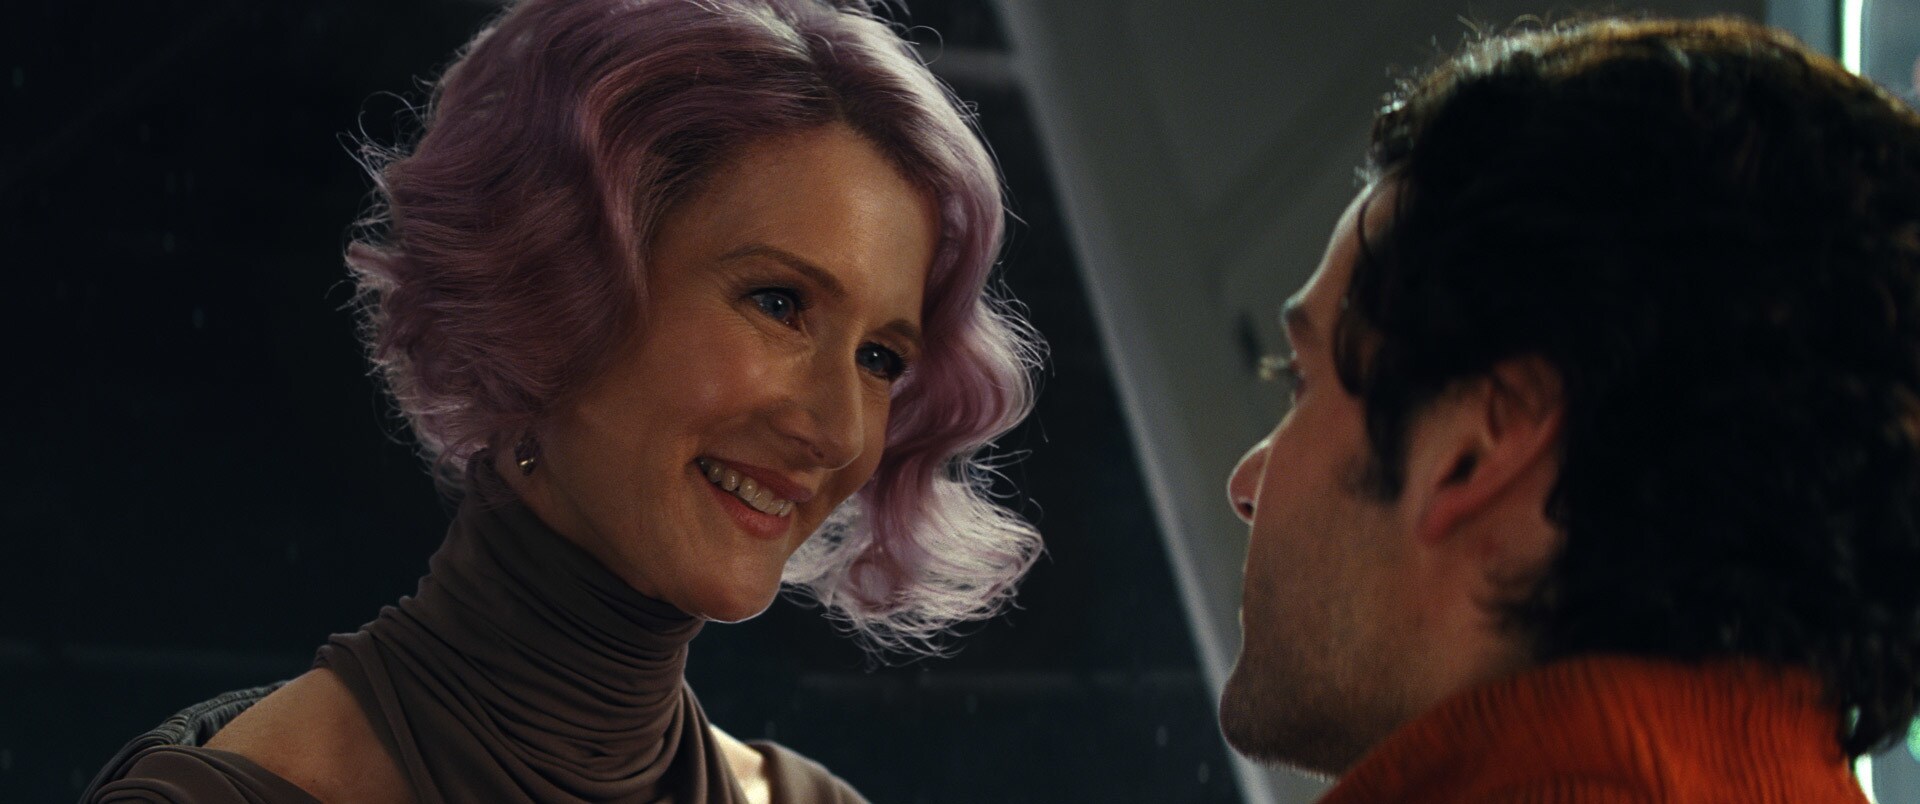 Poe demands to know Holdo's plan, but the vice admiral will not share. She is well aware of Poe's...